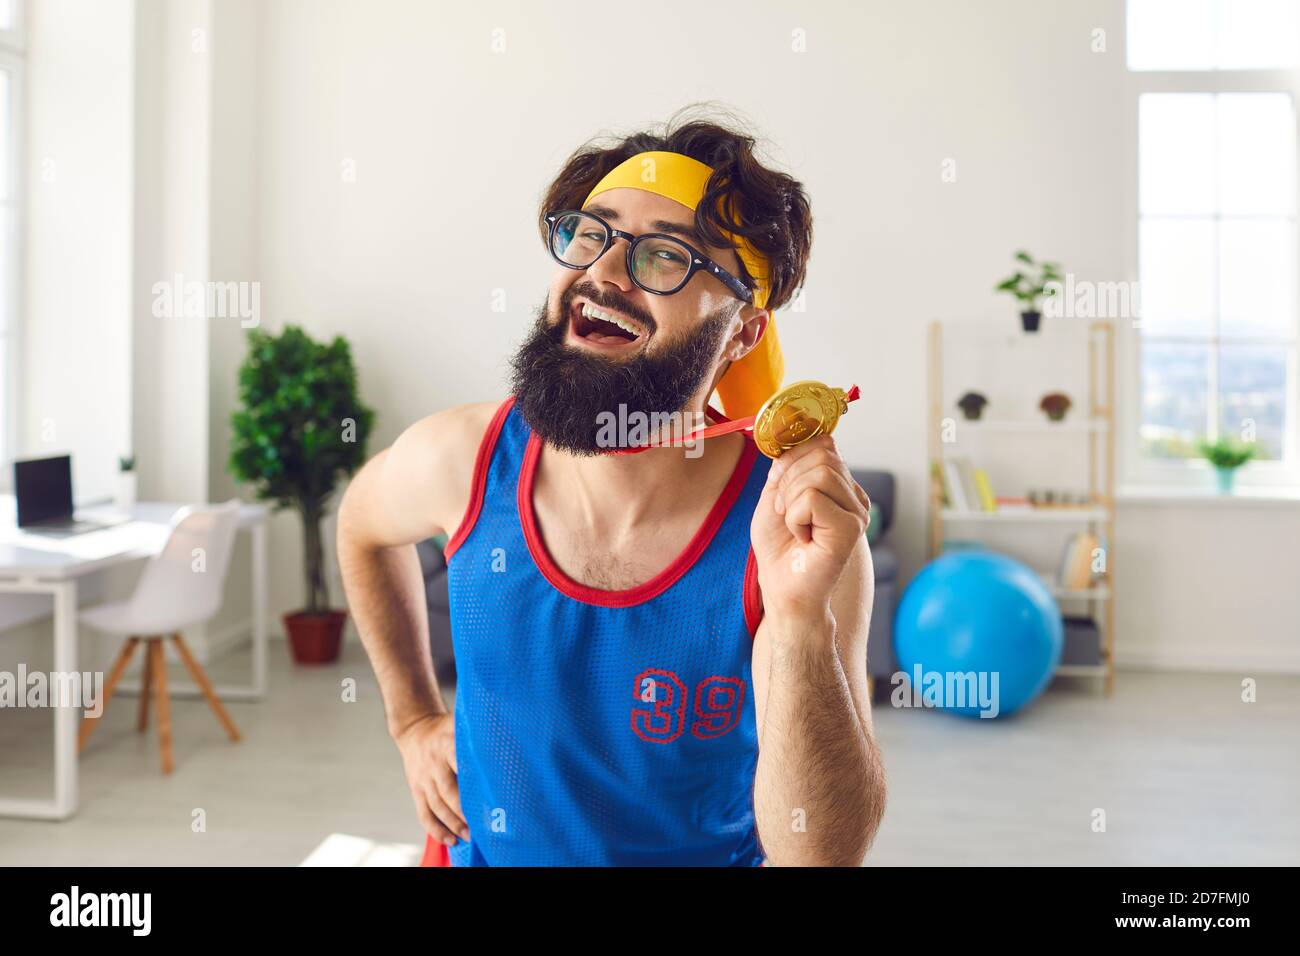 Portrait of a crazy emotional joyful athlete man holding a medal in his hand and flaunting it. Stock Photo